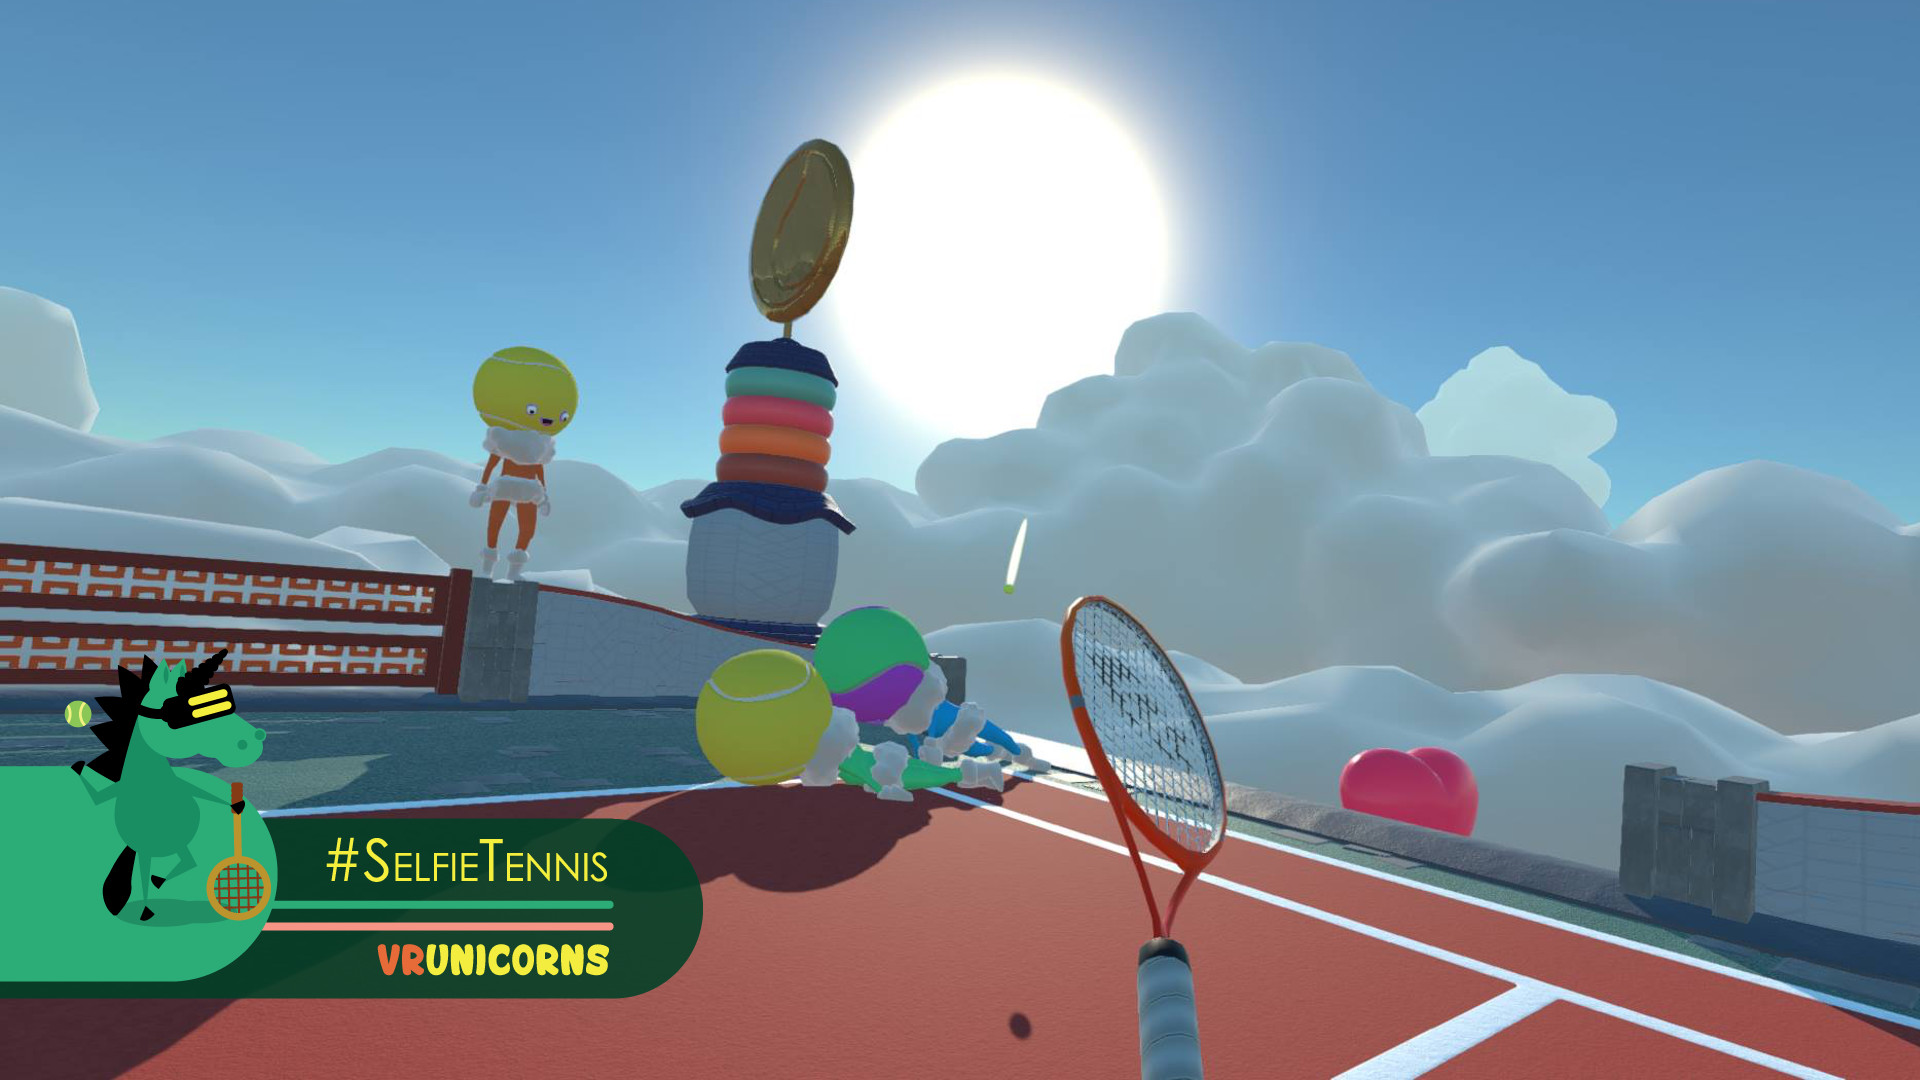 If you wanted to see what tennis would be like in the clouds with a lot of pastel colors, this is the game for you!